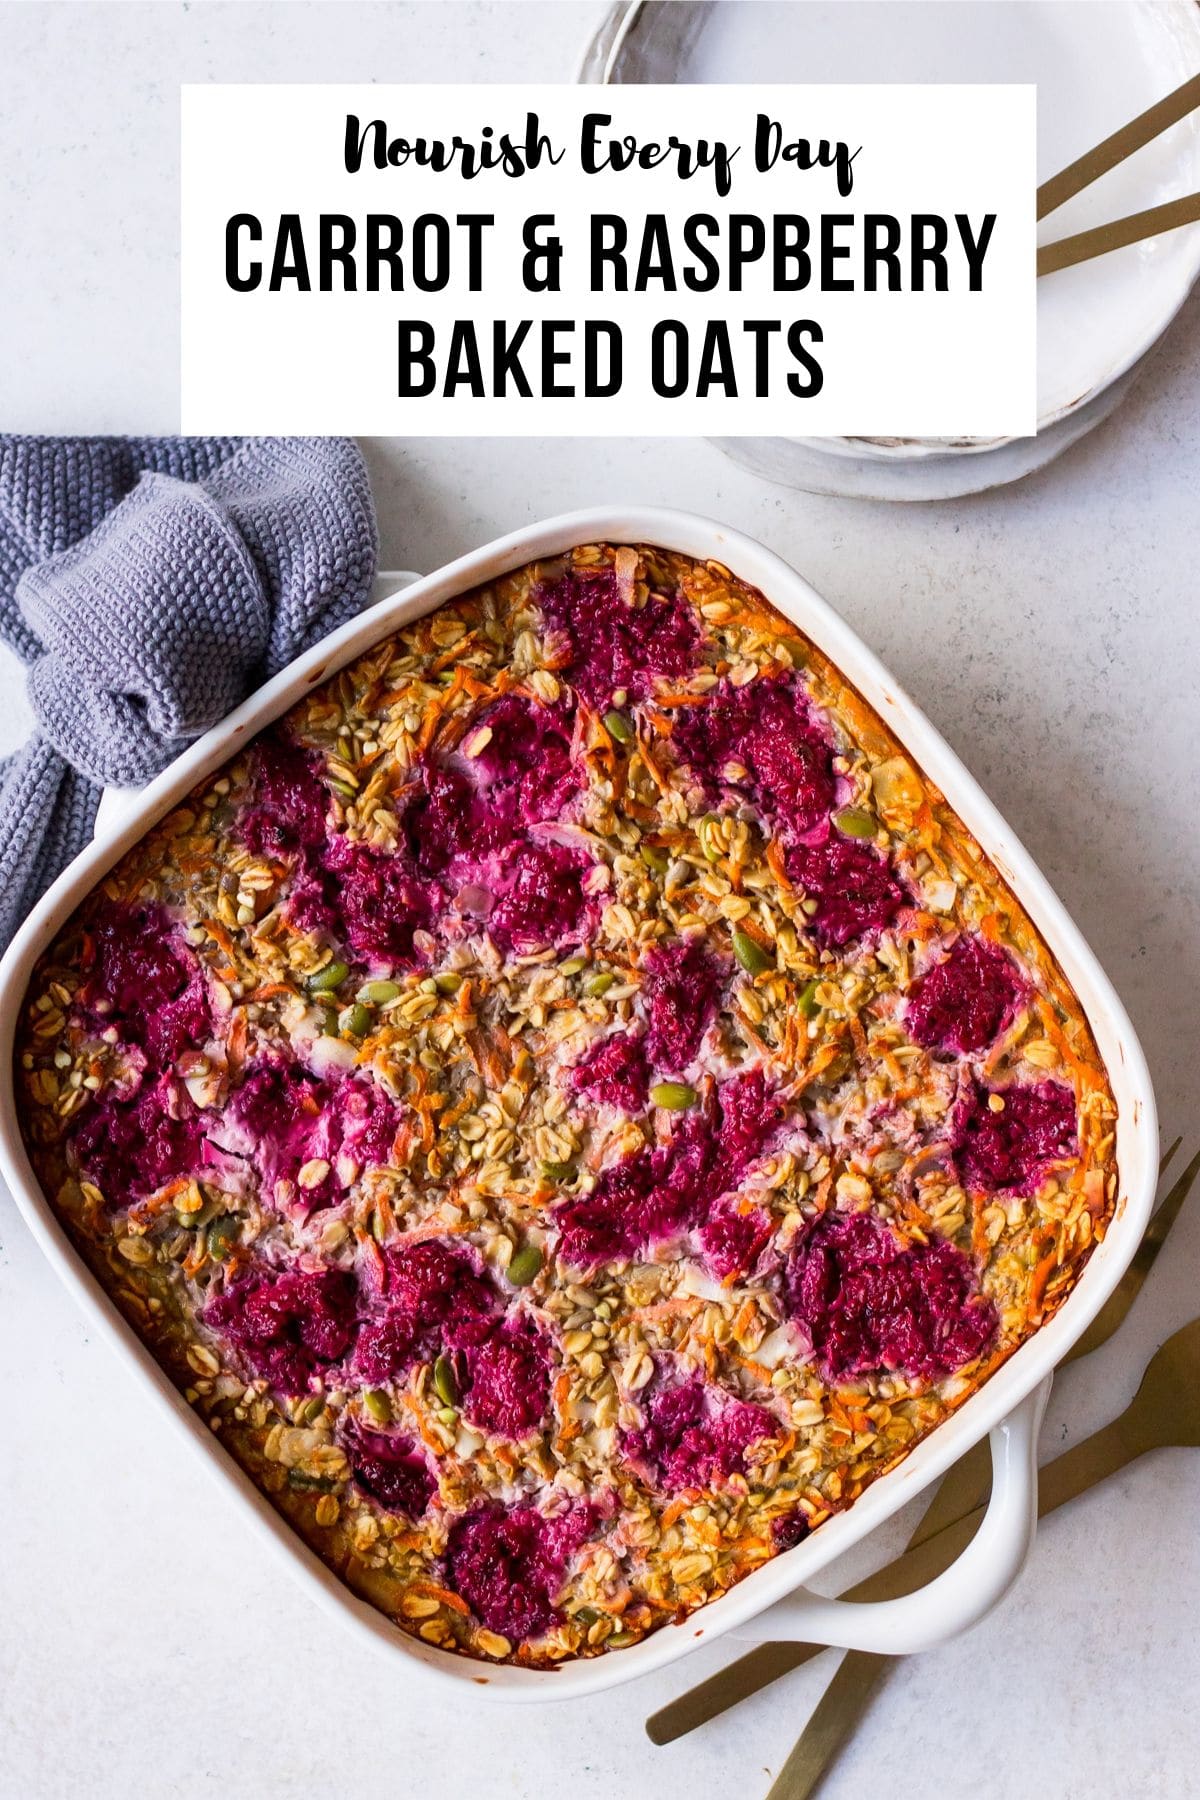 Carrot & Raspberry Baked Oats Recipe by Nourish Every Day